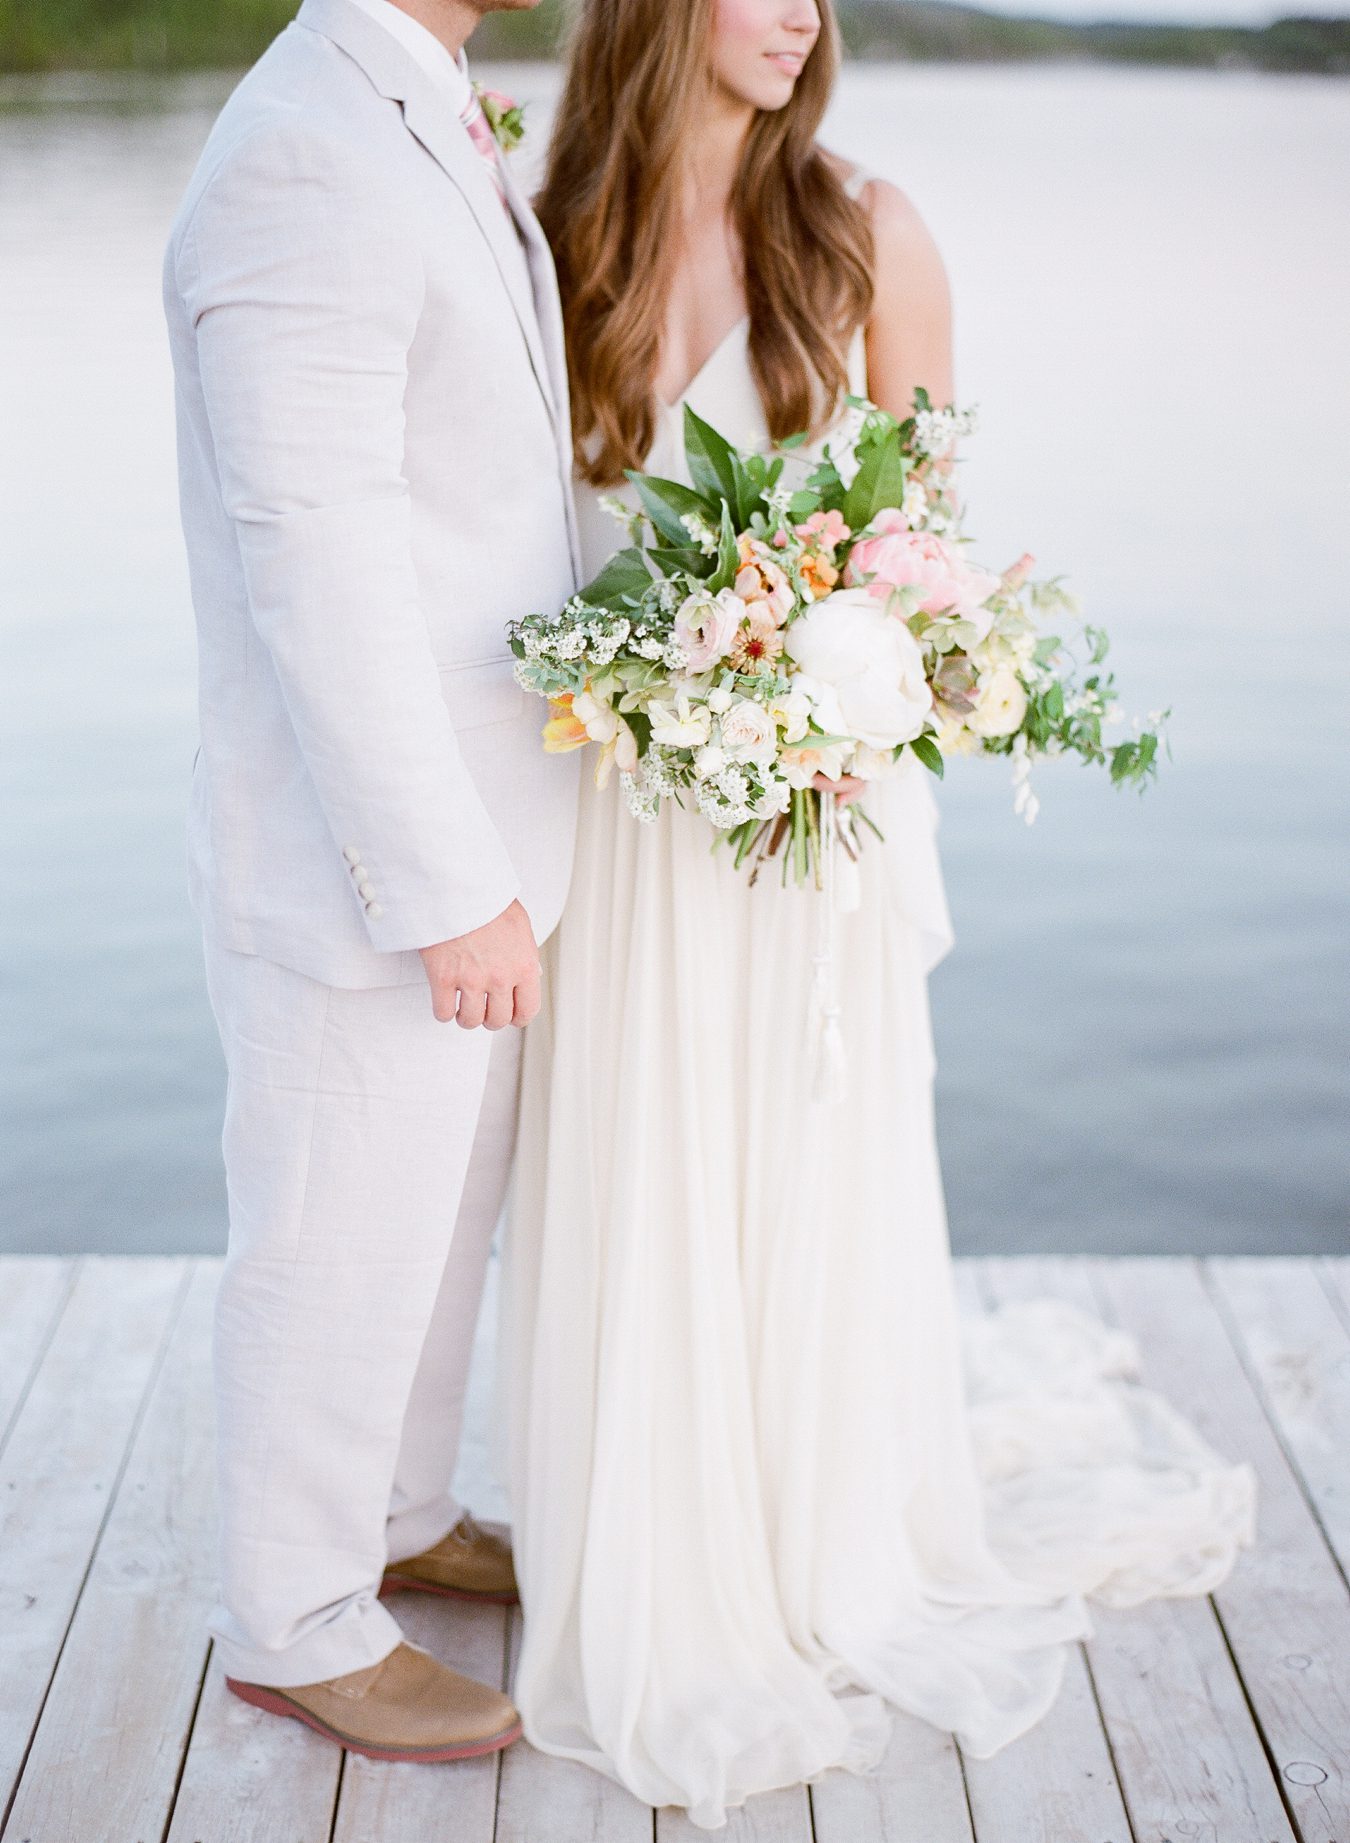 Fountain Point Resort | Sincerely, Ginger Event Design & Production | BLOOM Floral Design | Cory Weber Photography